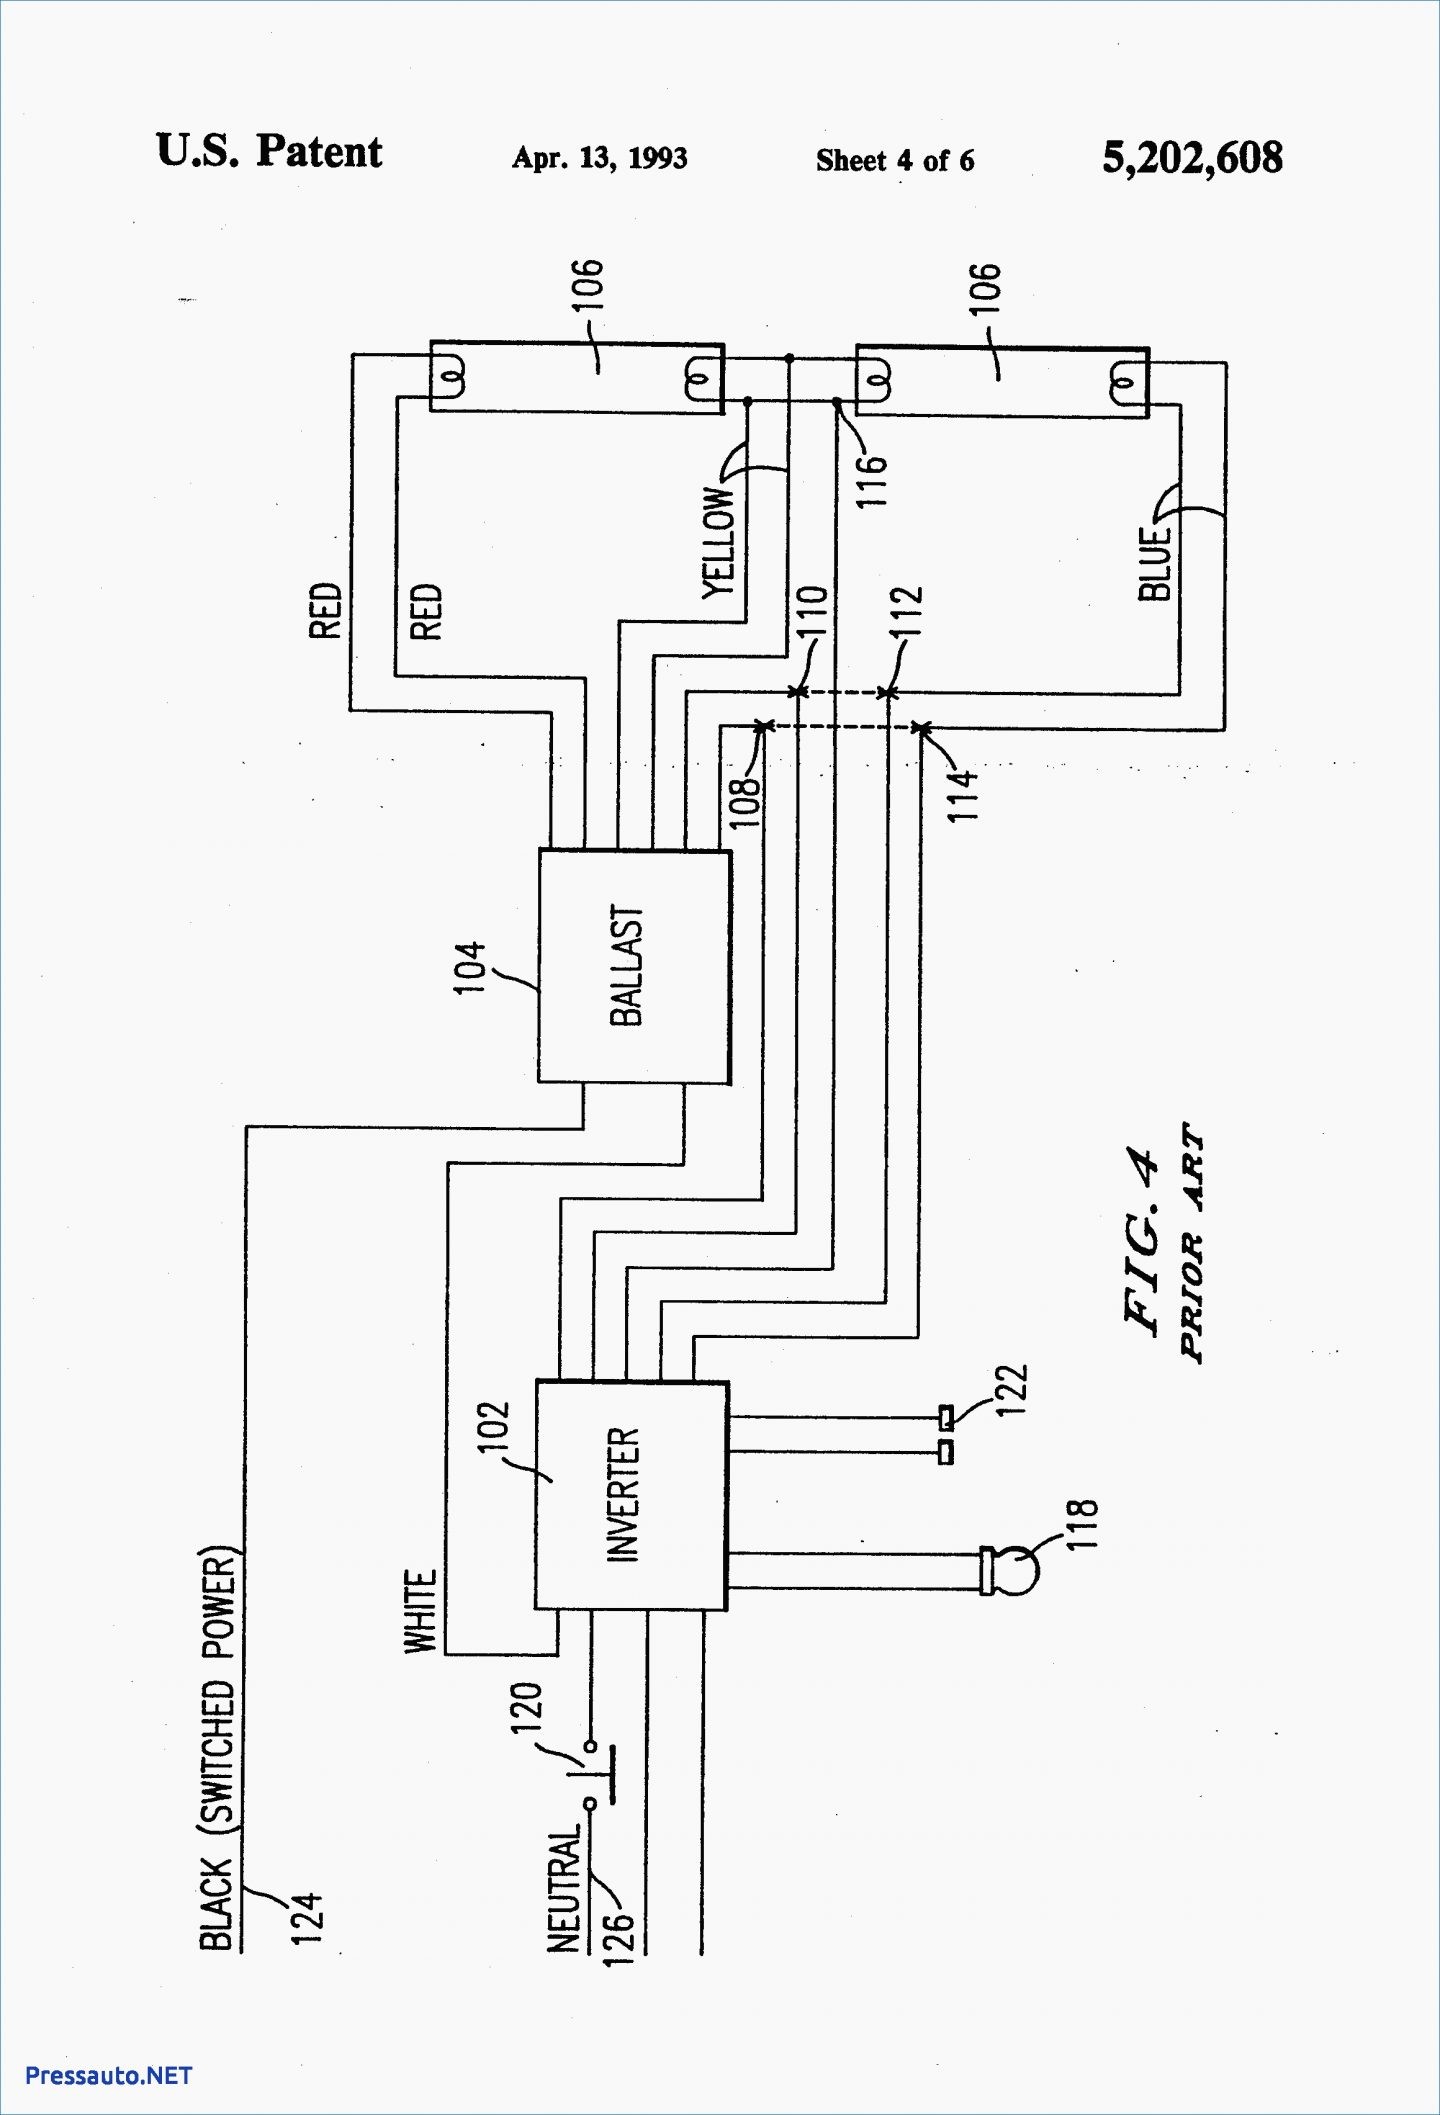 Lighting Contactor Wiring Diagram with cell Inspiration Lighting Contactor Wiring Diagram with cell Westmagazine